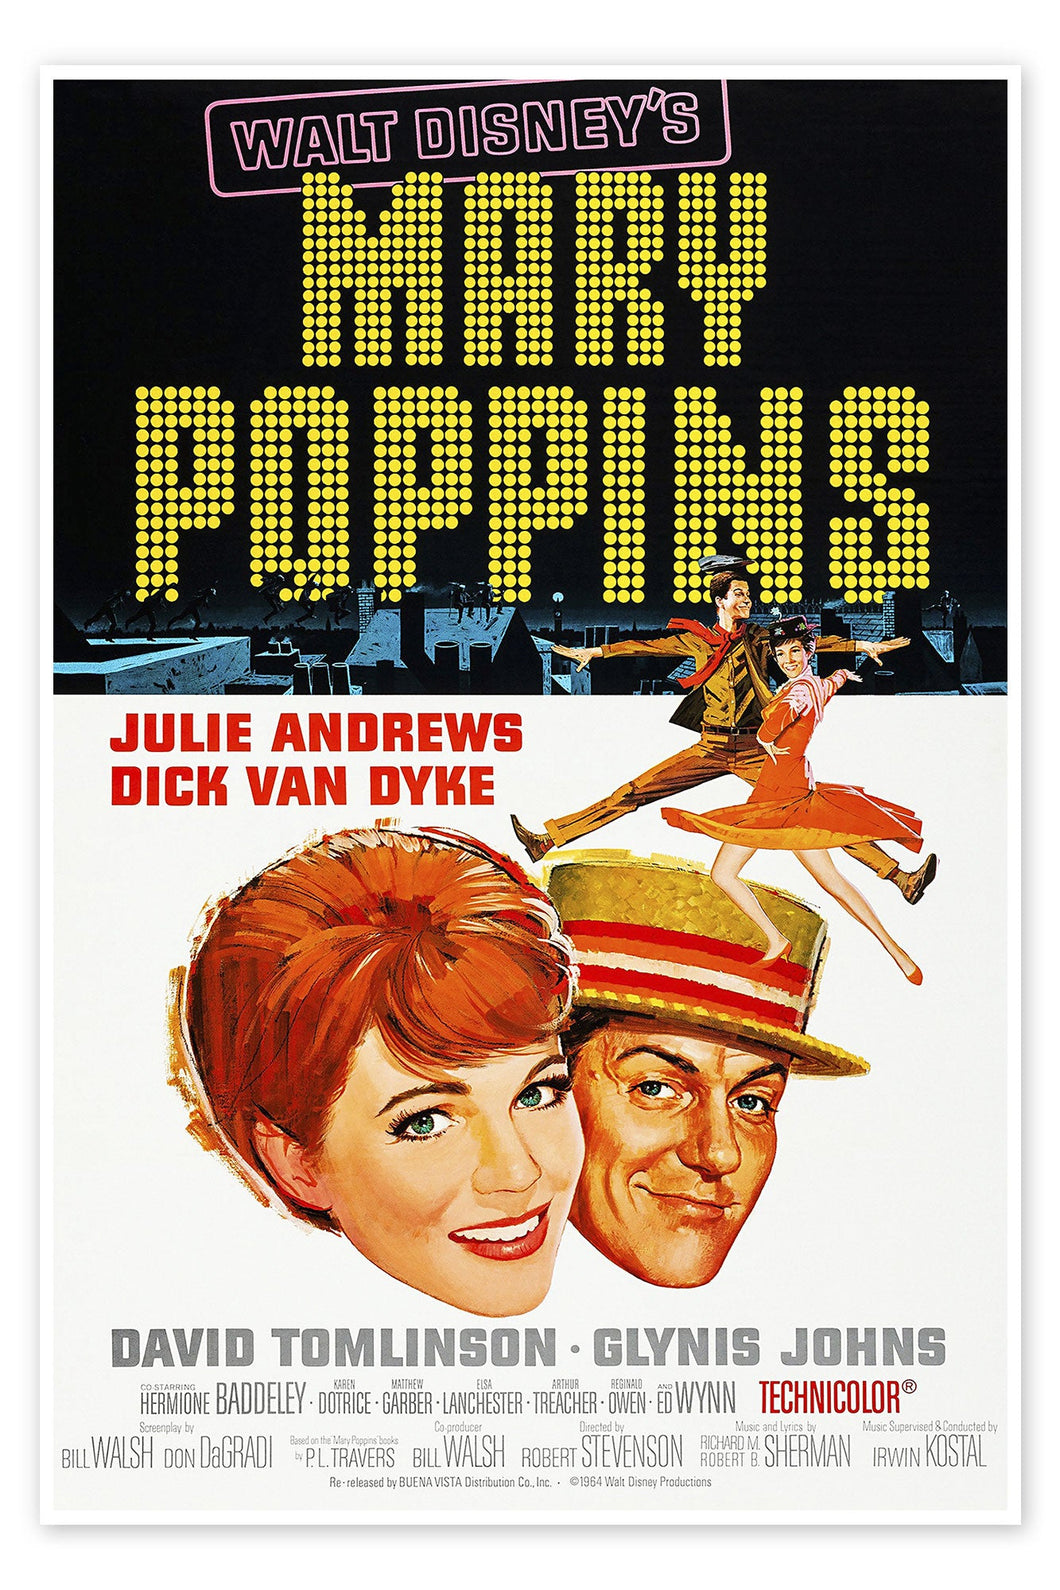 Dick Van Dyke & Karen Dotrice signed Mary Poppins poster photo Image #1 (8x10, 11x17)